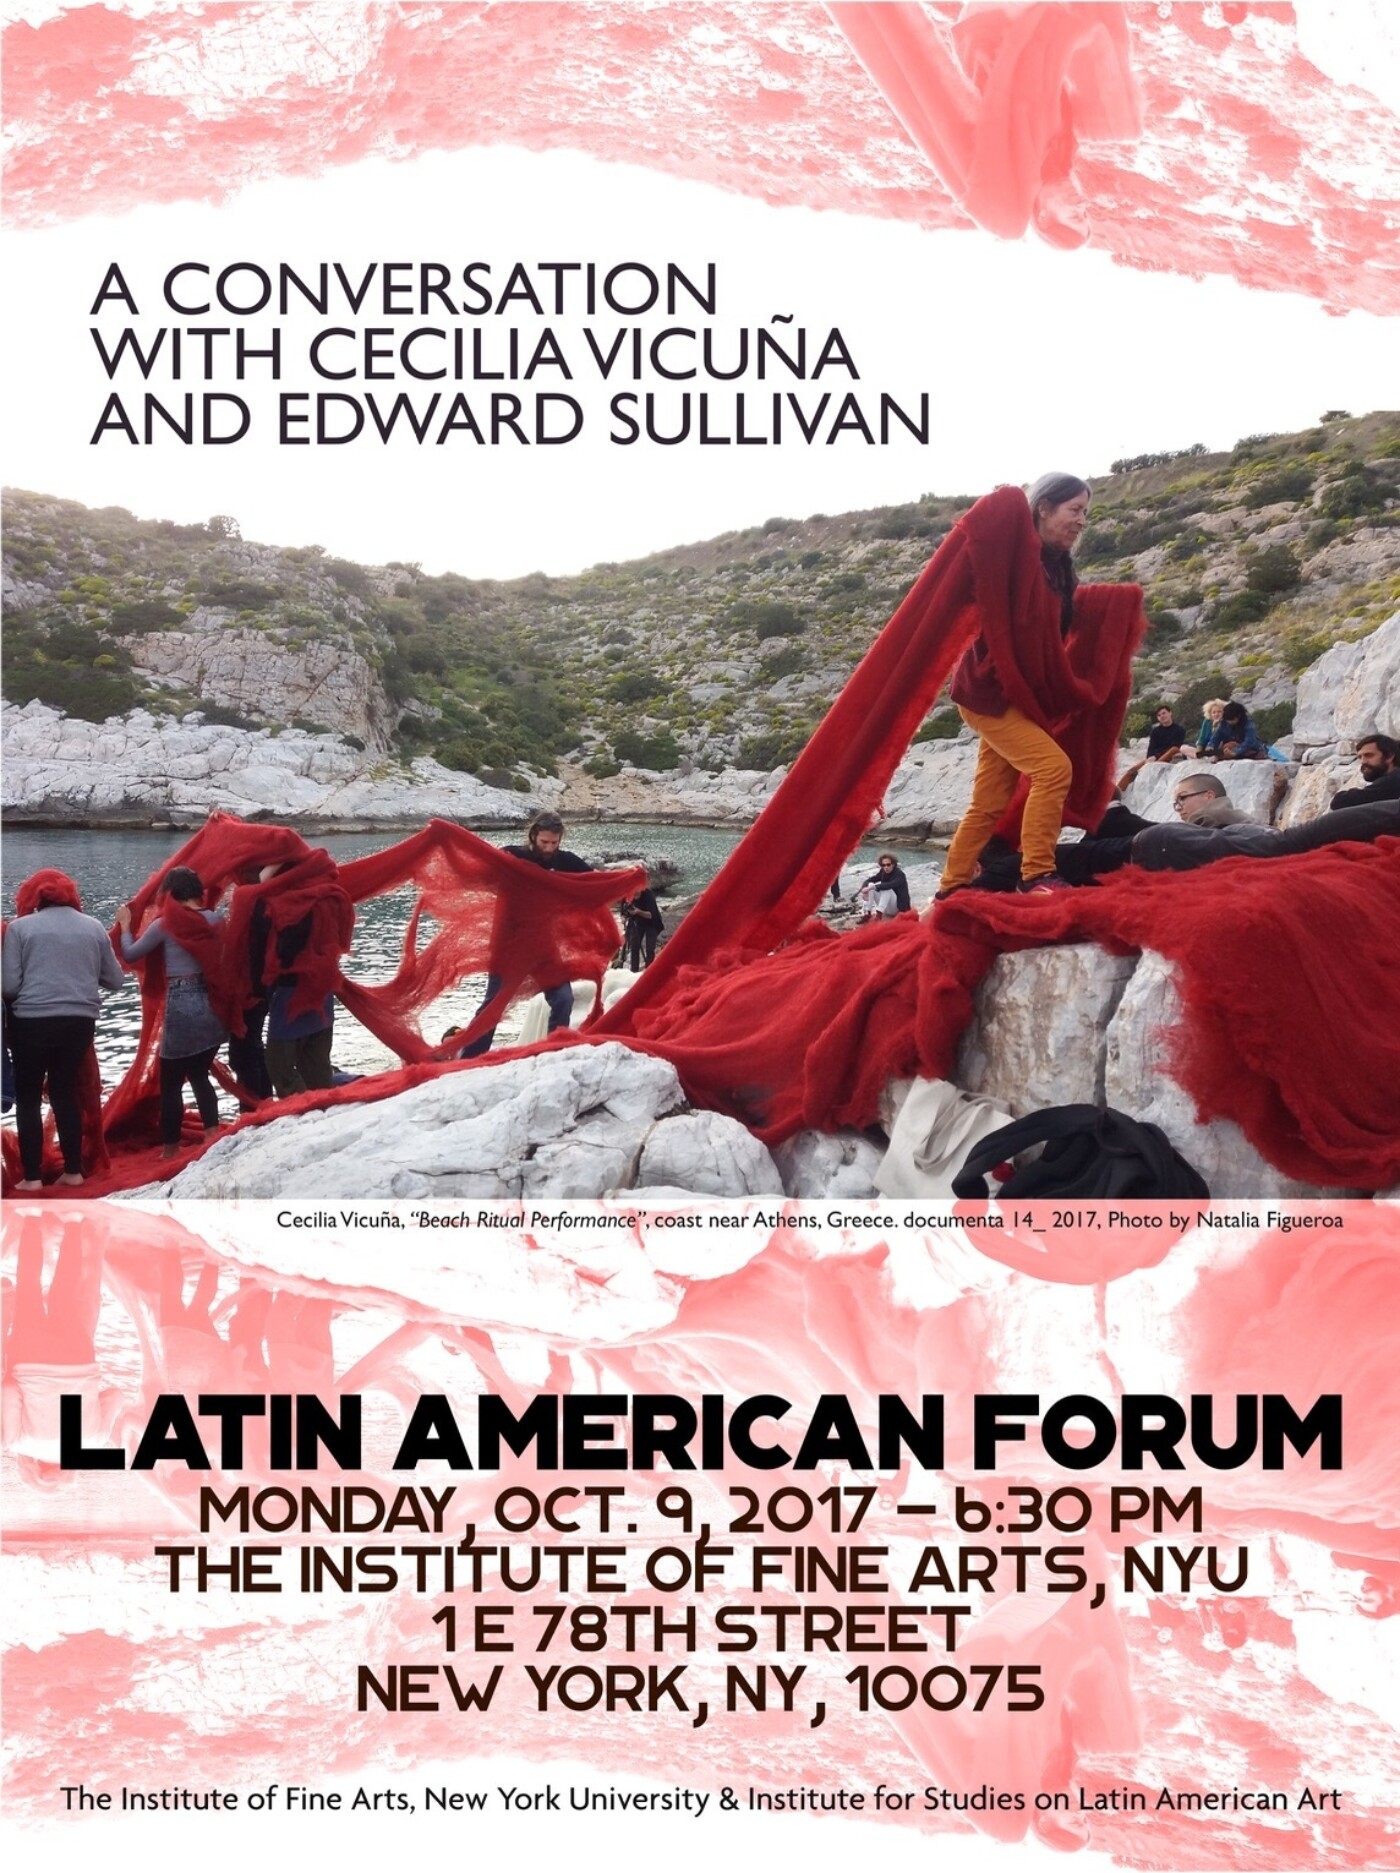 Poster featuring an image of Cecilia Vicuña's performance of people removing a large mass of red fabric from an ocean.